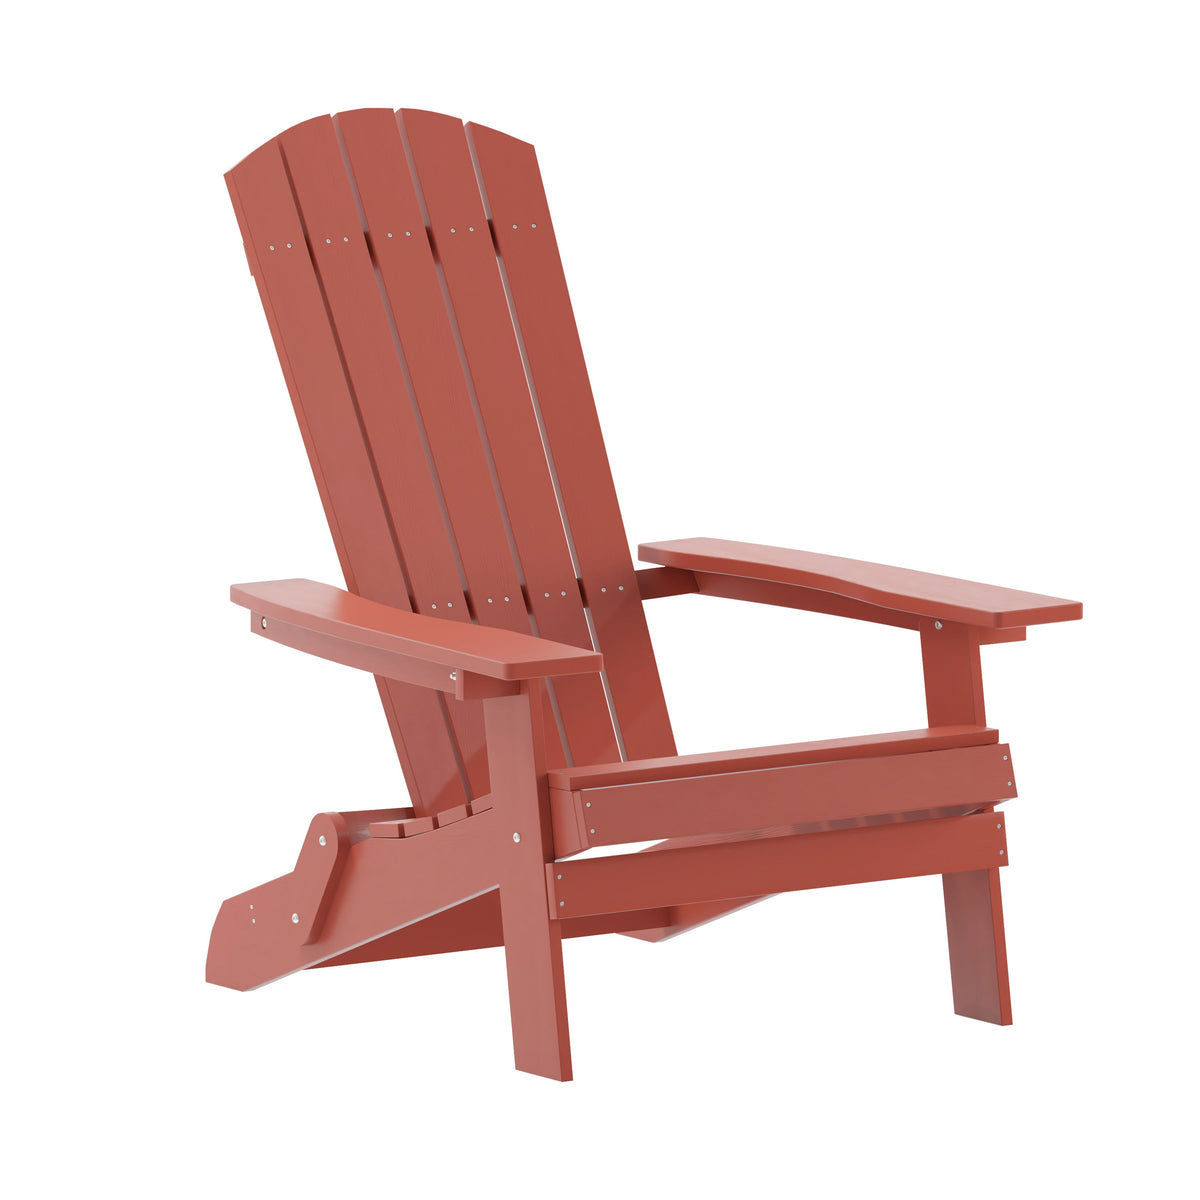 Red |#| All-Weather Poly Resin Folding Adirondack Chair in Red - Patio Chair